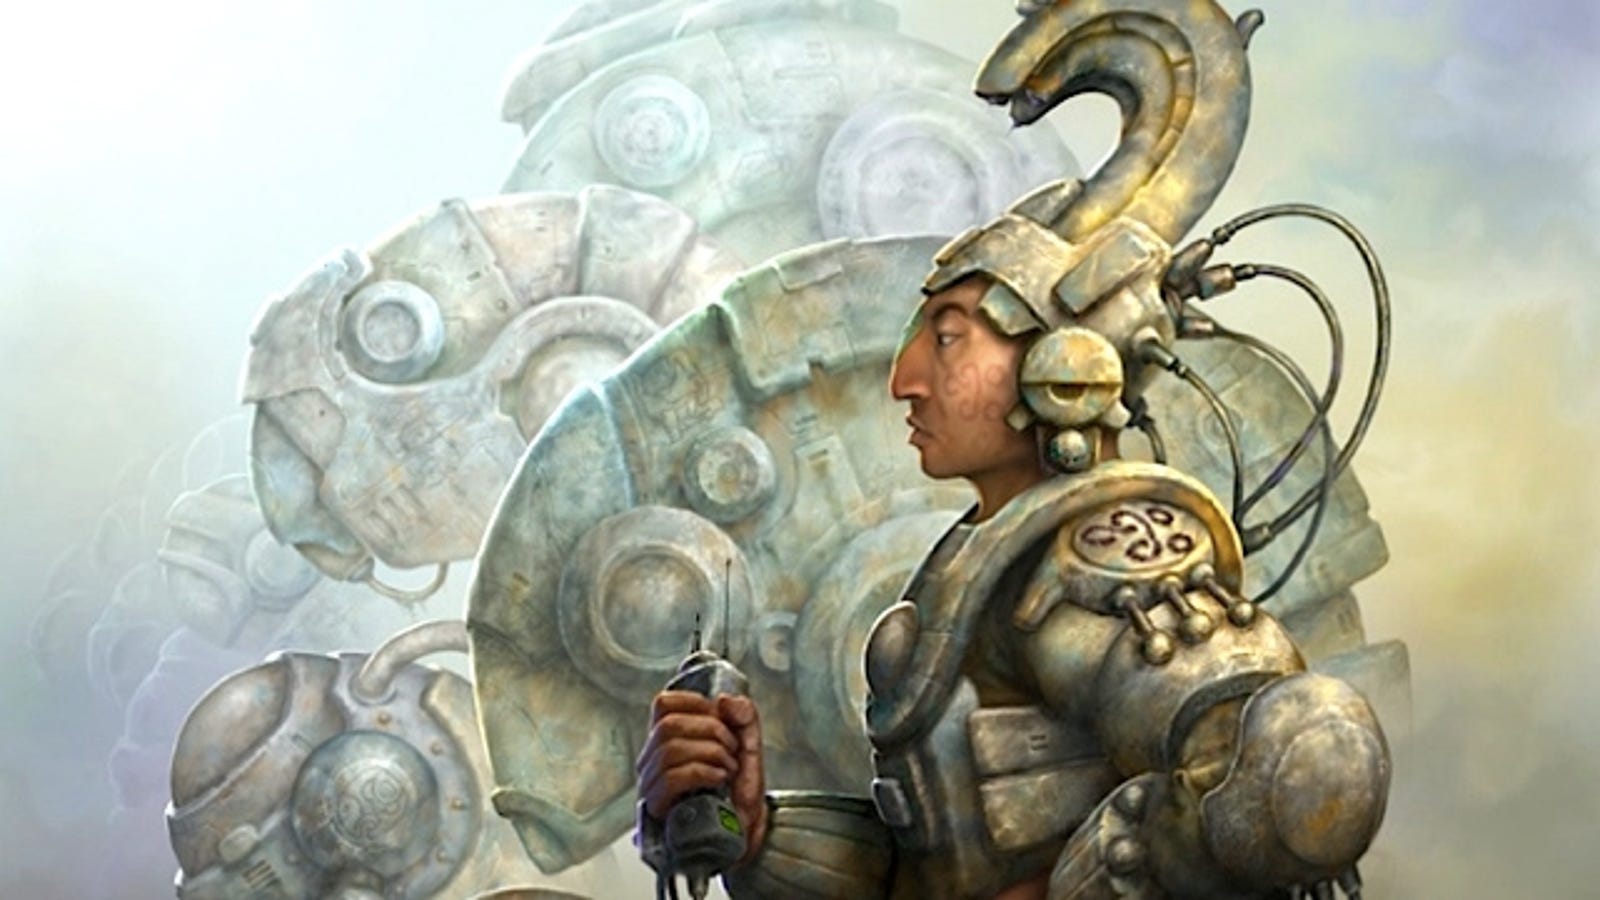 Behold, the Aztec mecha and Mayan cyborgs of our Mesoamerican future